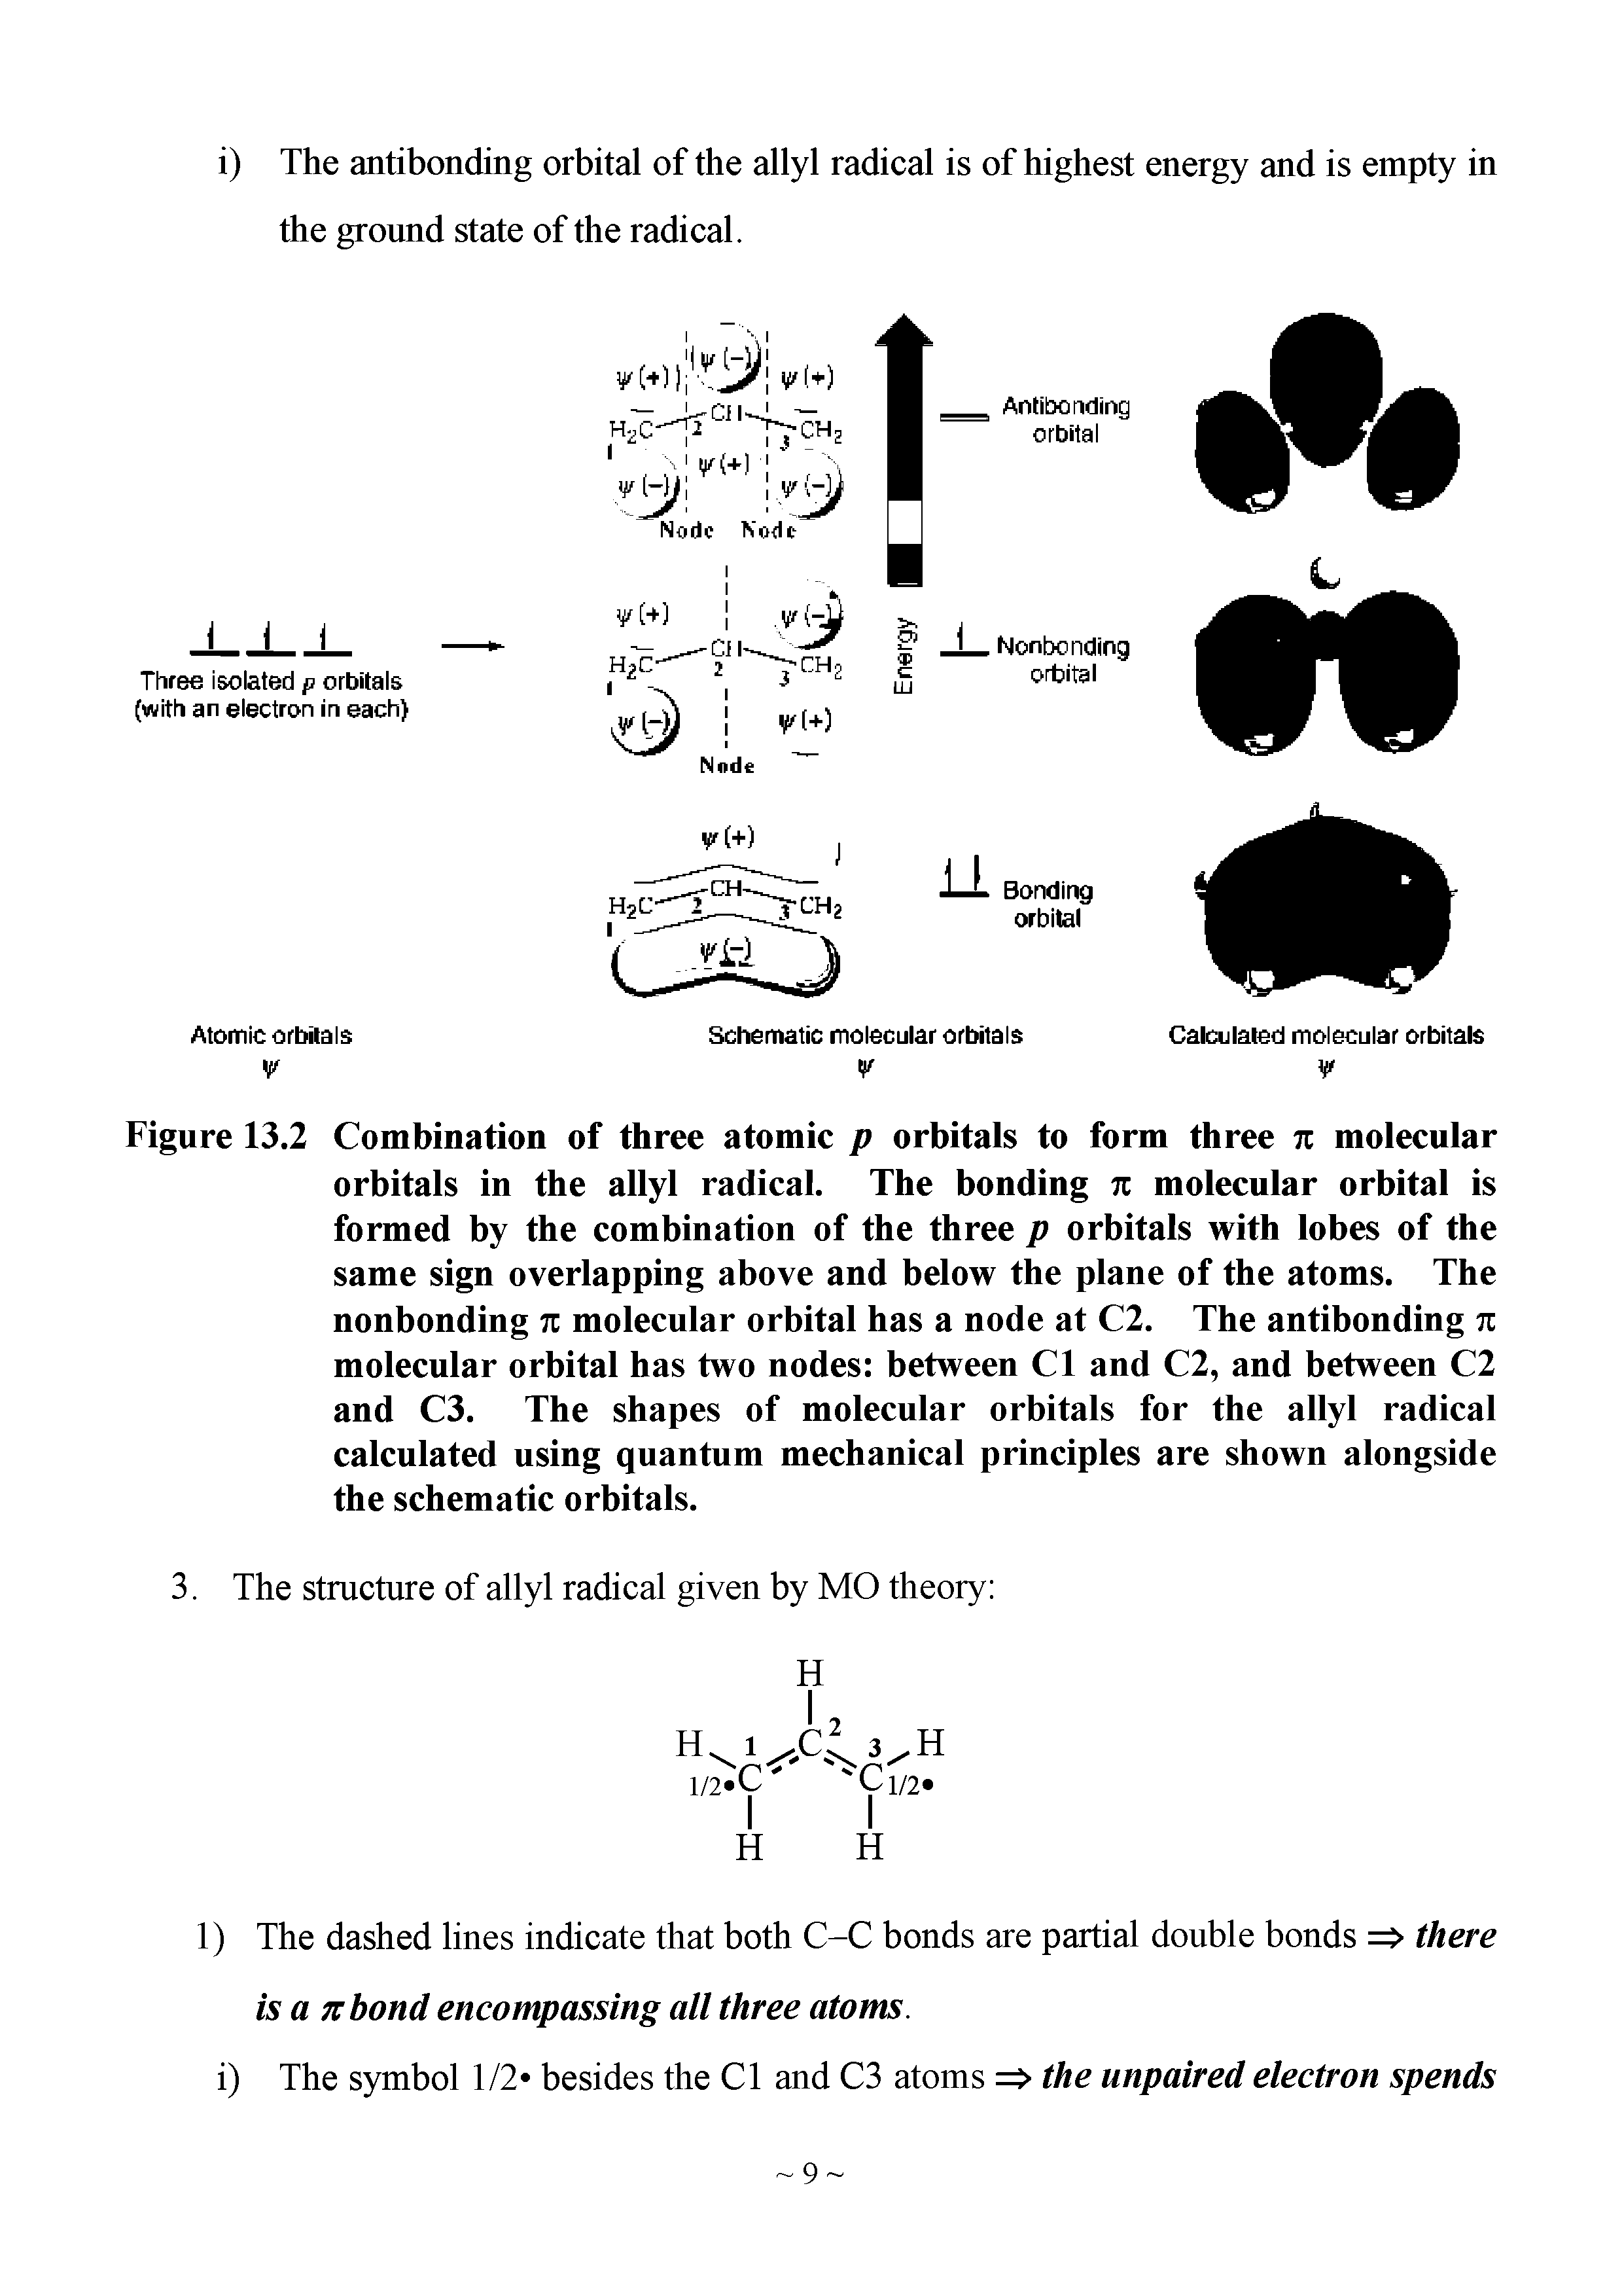 Figure 13.2 Combination of three atomic p orbitals to form three n molecular orbitals in the allyl radical. The bonding n molecular orbital is formed by the combination of the three p orbitals with lobes of the same sign overlapping above and below the plane of the atoms. The nonbonding n molecular orbital has a node at C2. The antibonding n molecular orbital has two nodes between Cl and C2, and between C2 and C3. The shapes of molecular orbitals for the allyl radical calculated using quantum mechanical principles are shown alongside the schematic orbitals.